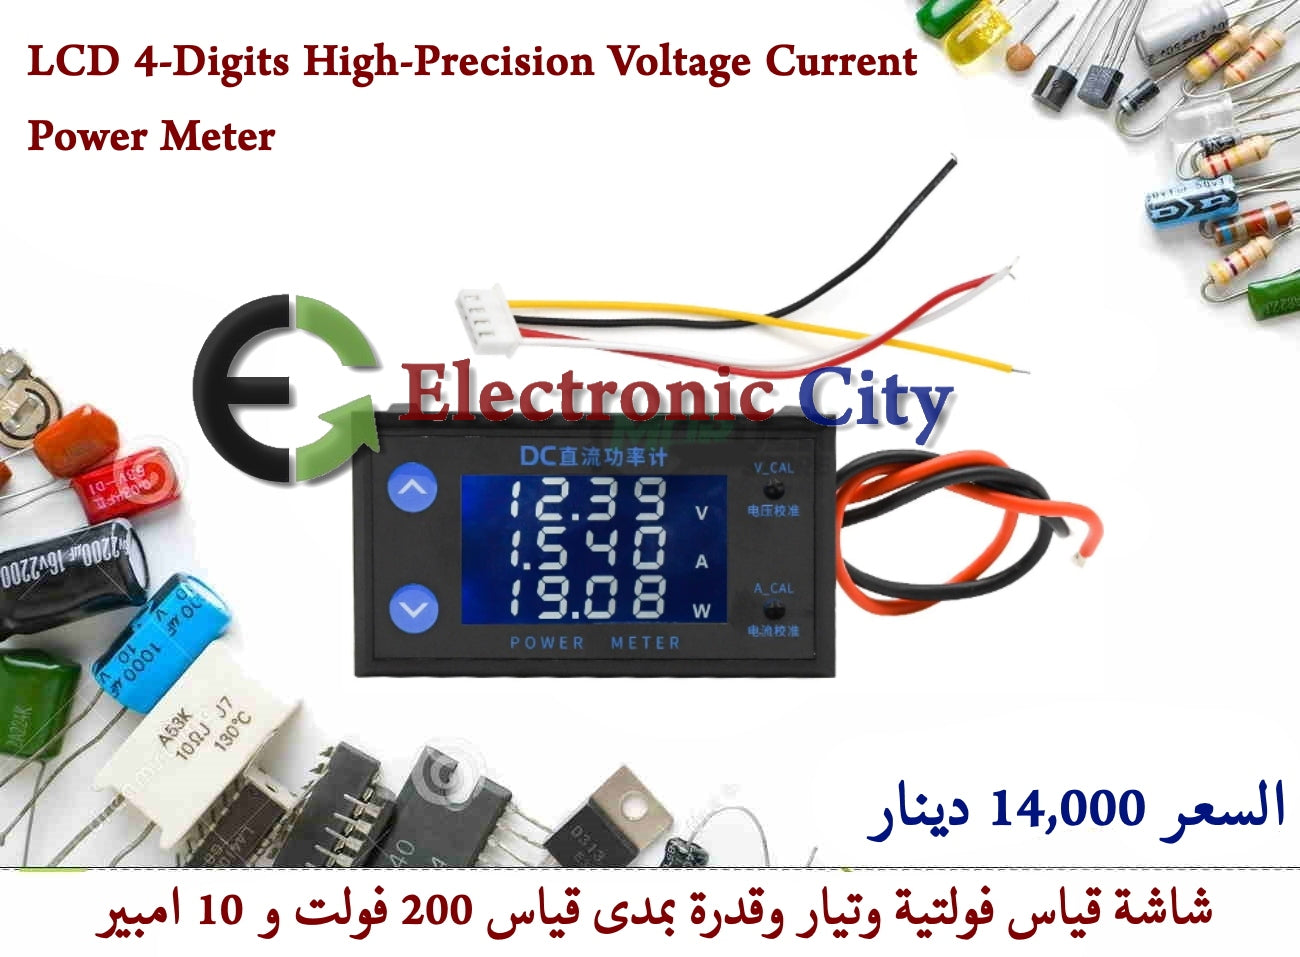 LCD 4-Digits High-Precision Voltage Current Power Meter #E3 XO0040-01